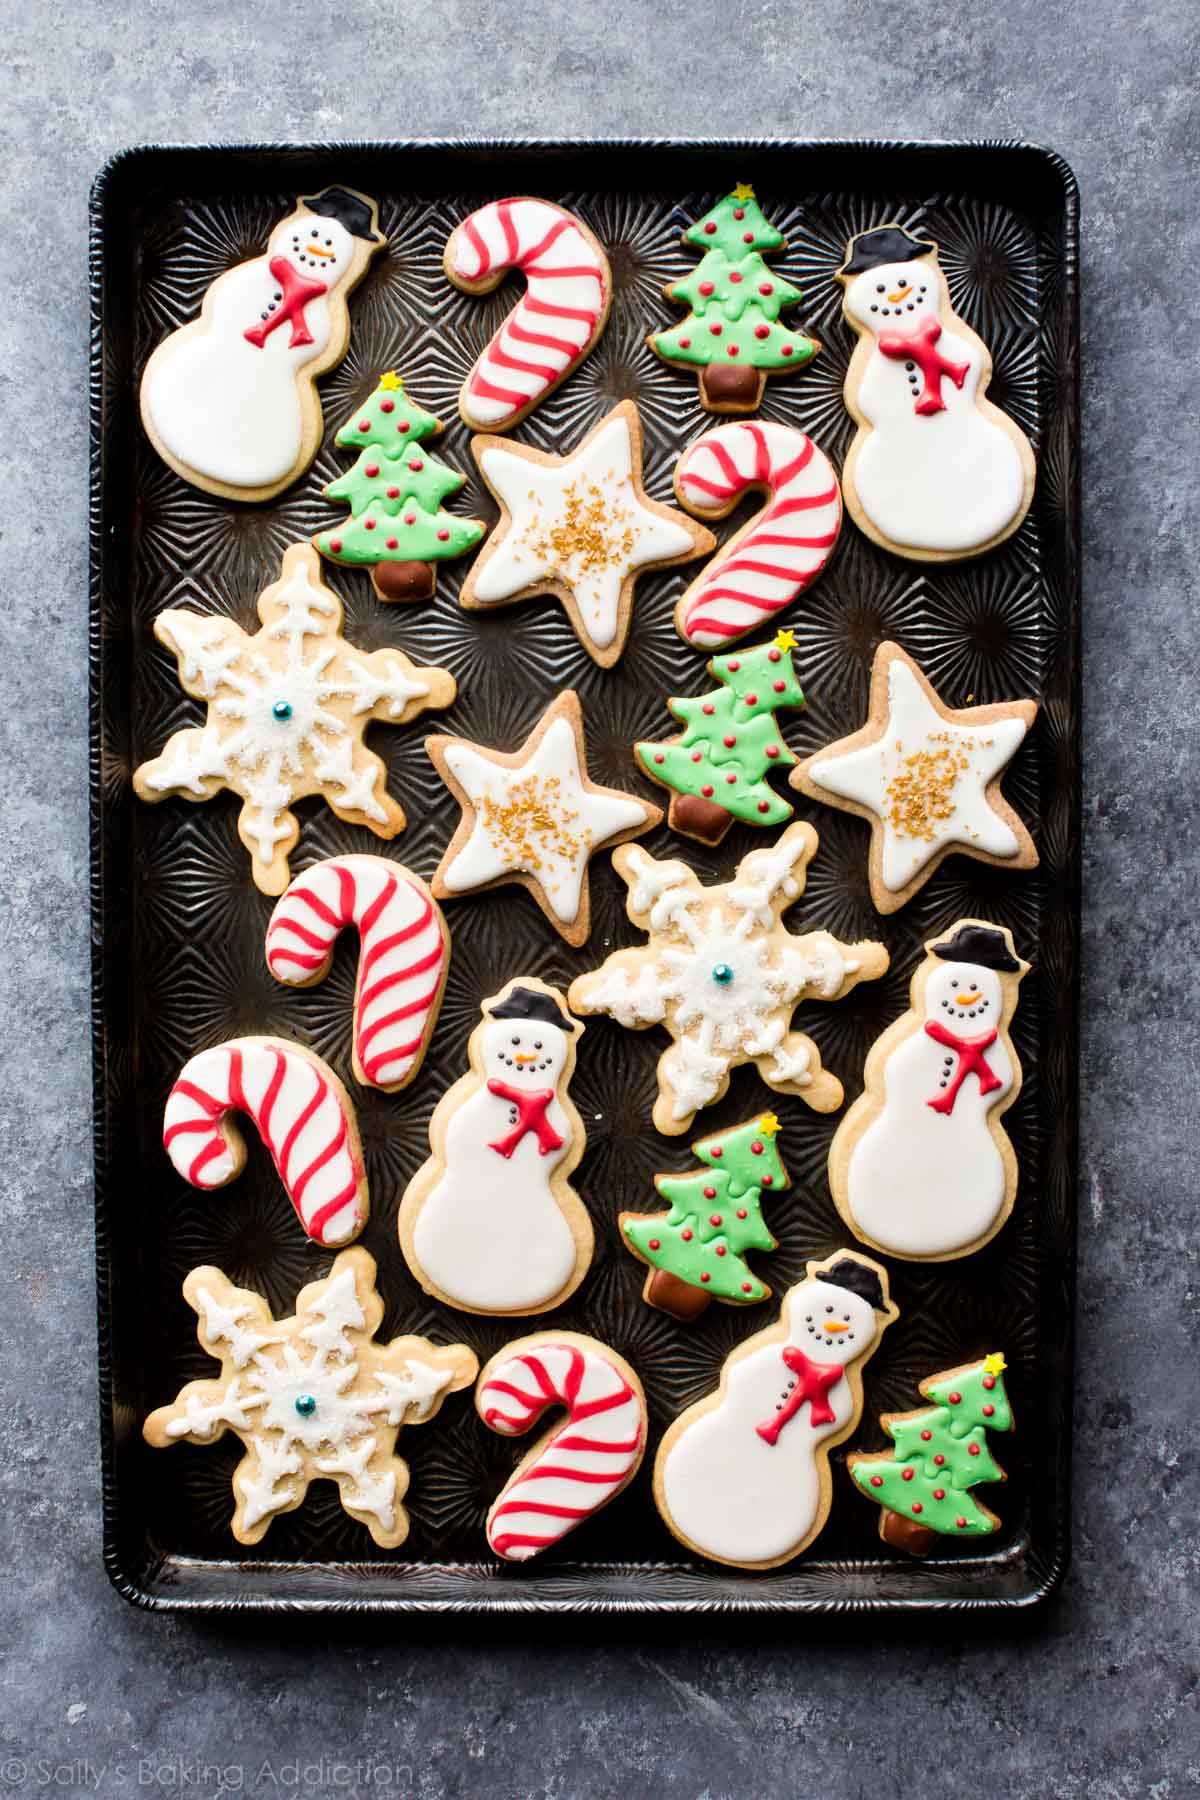 Decorated Christmas Cookies
 1 Sugar Cookie Dough 5 Ways to Decorate Sallys Baking